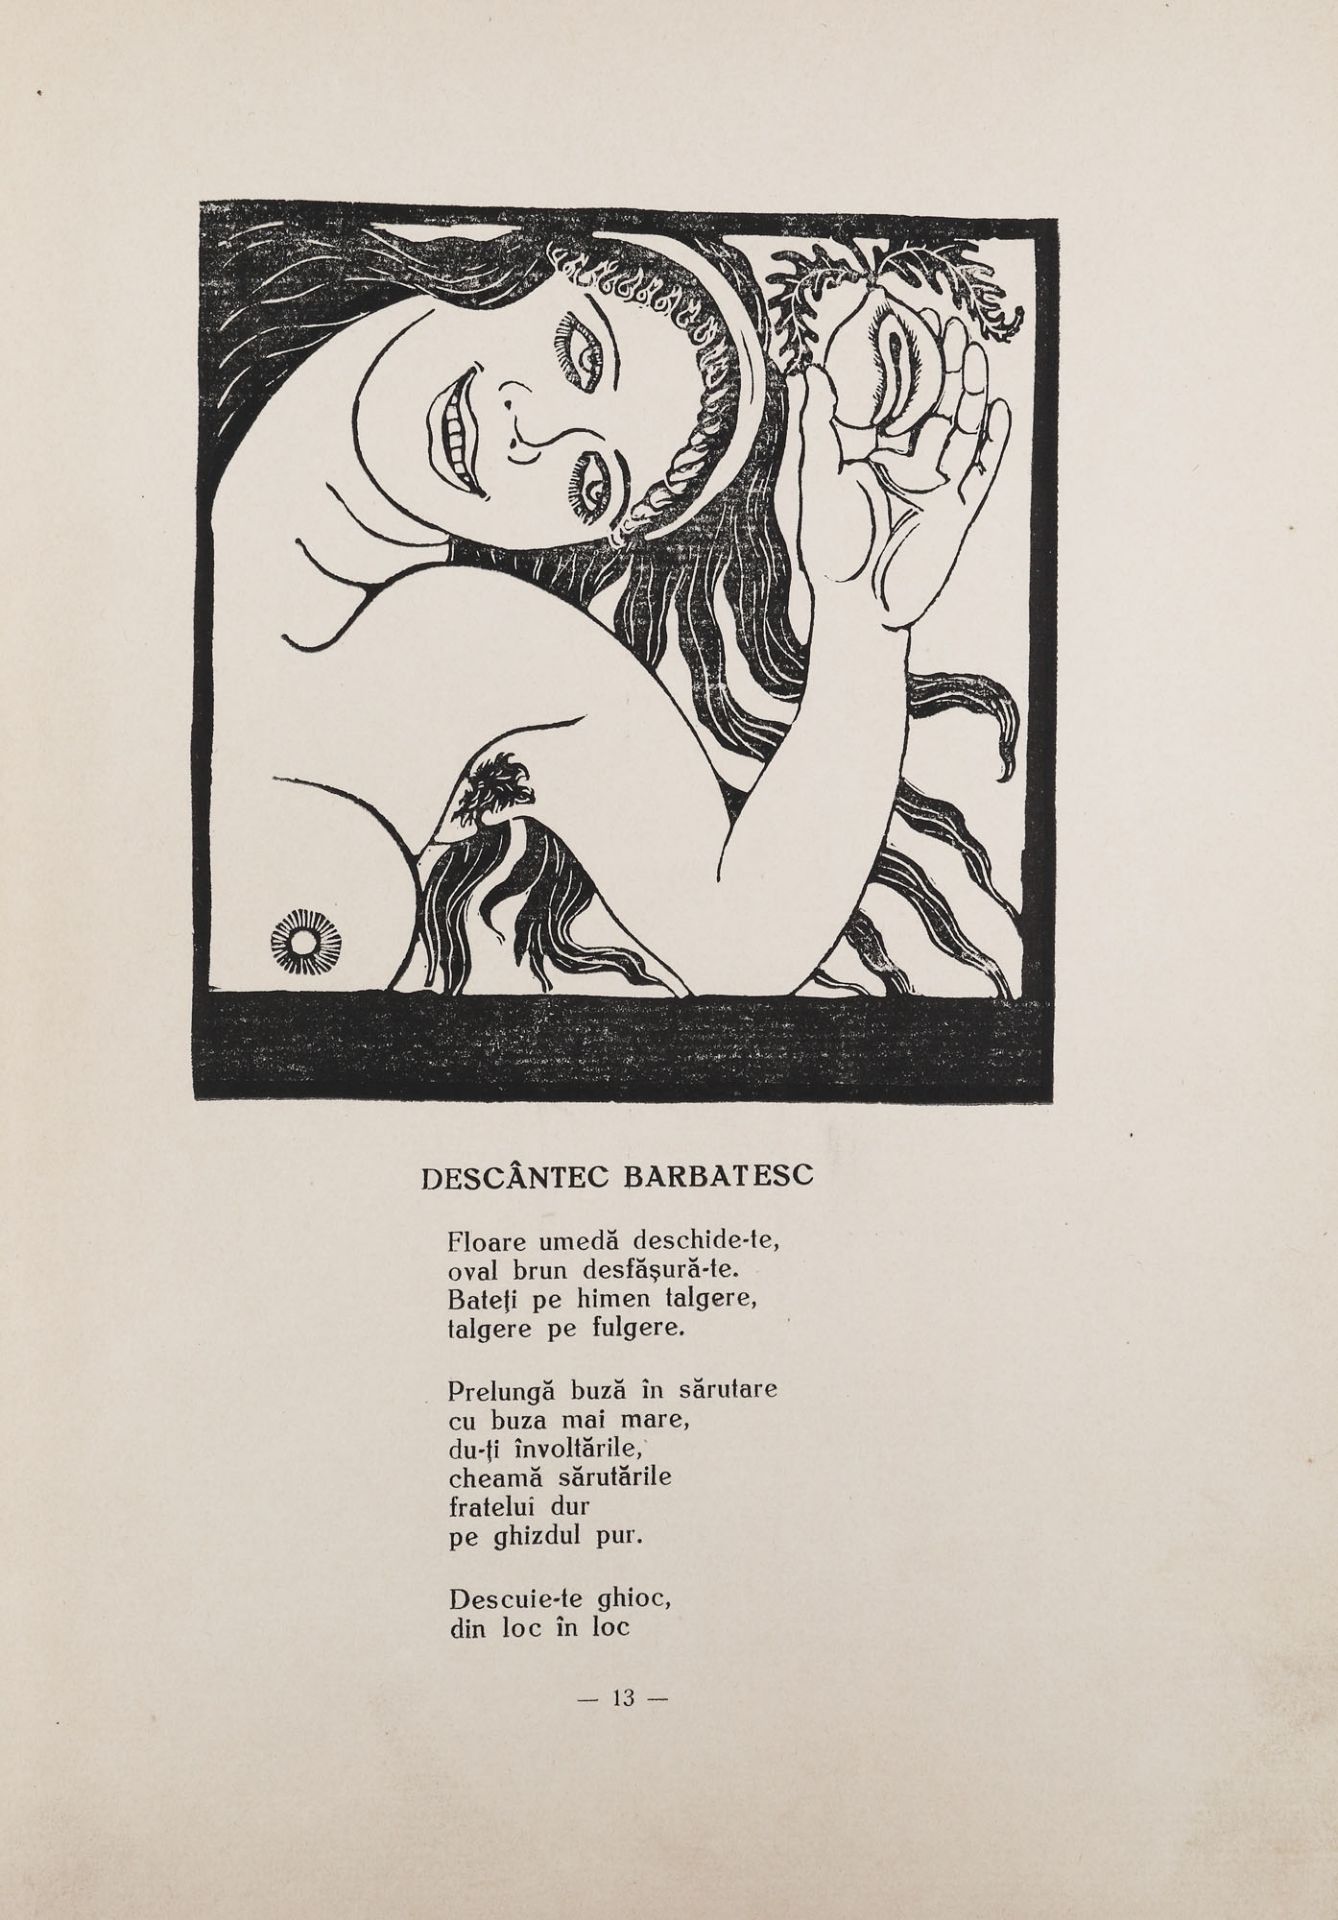 "Strig?ri trupe?ti lâng? glezne", by Camil Baltazar, with illustrations by Mac Constantinescu, Bucha - Image 3 of 4